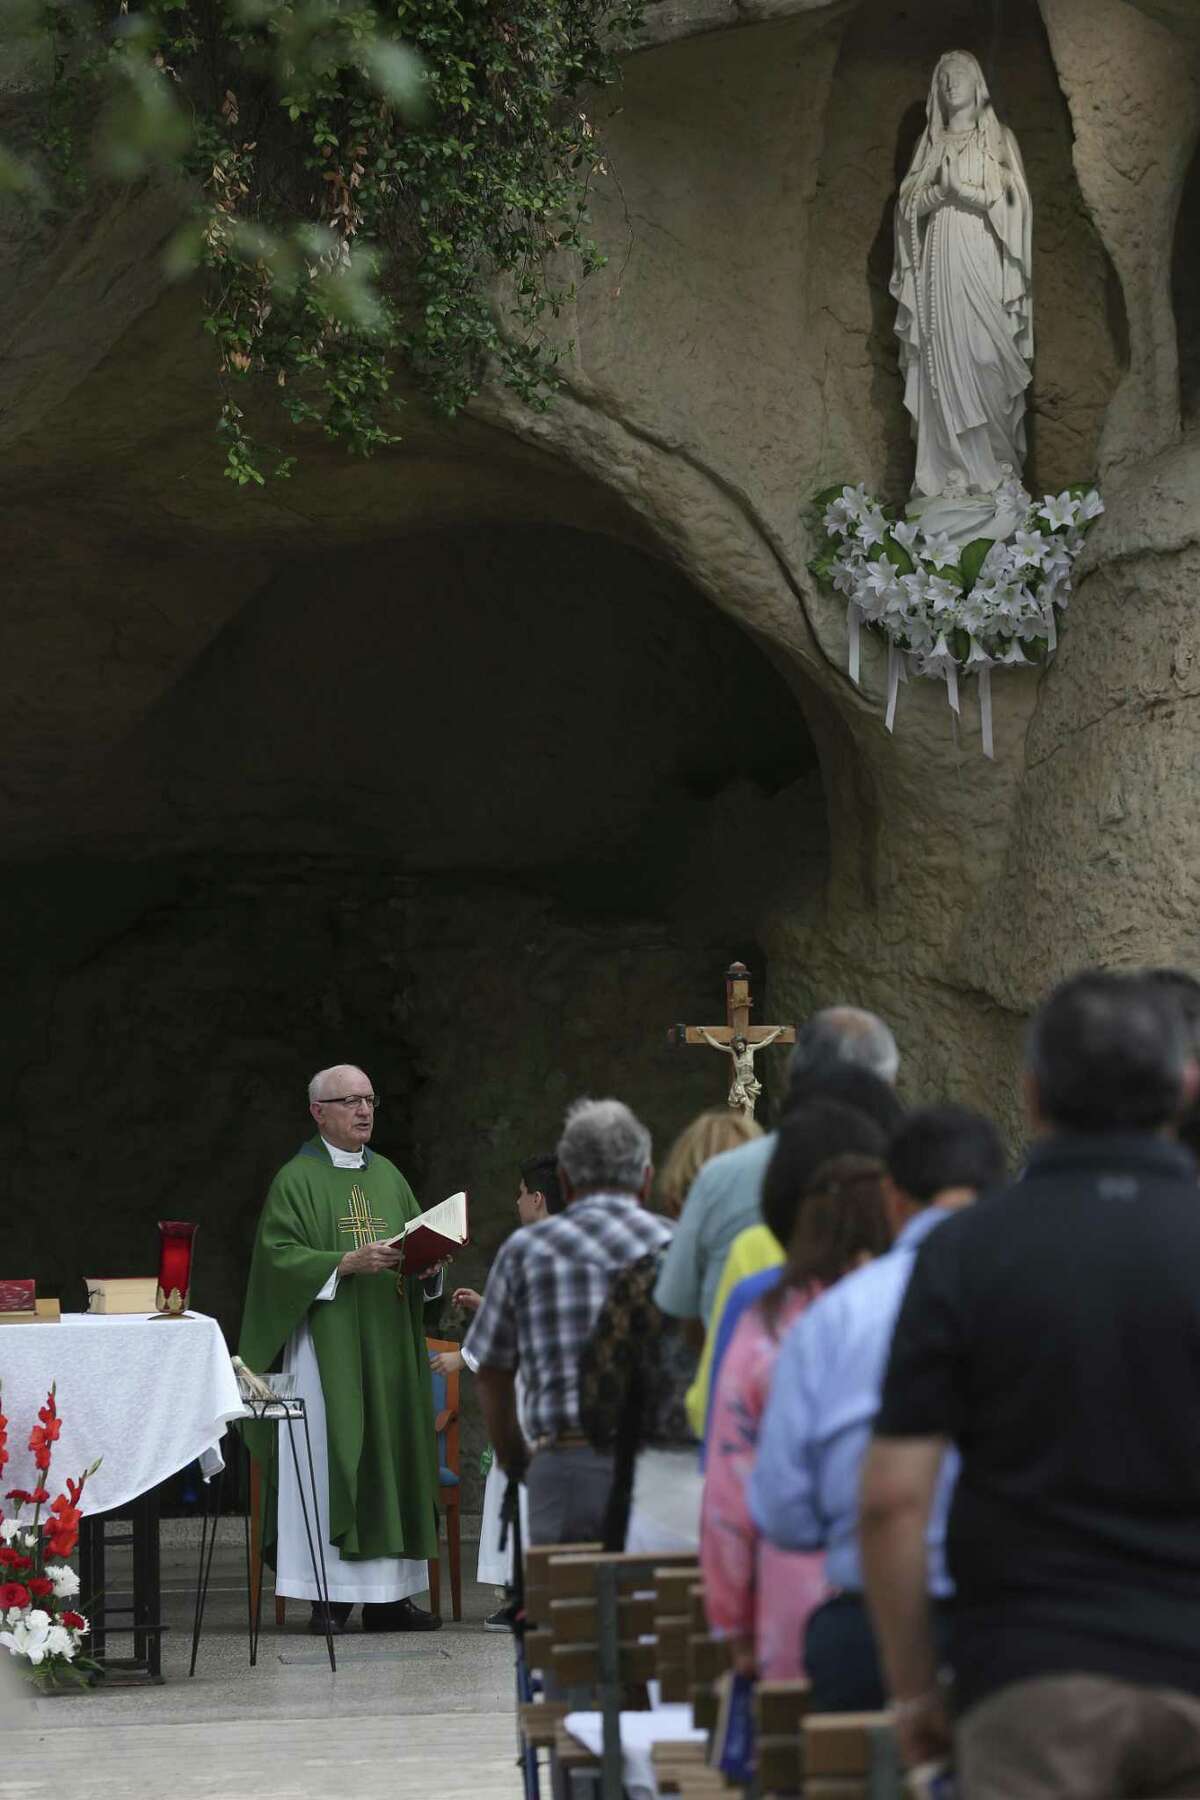 The Rev. Saturnino Lajo celebrates a summer Mass with congregants and visitors at Oblate Mission’s Our Lady of Lourdes Grotto and Tepeyac de San Antonio. Lajo is director of the Grotto’s Hispanic ministries and celebrates its Spanish-language Mass.